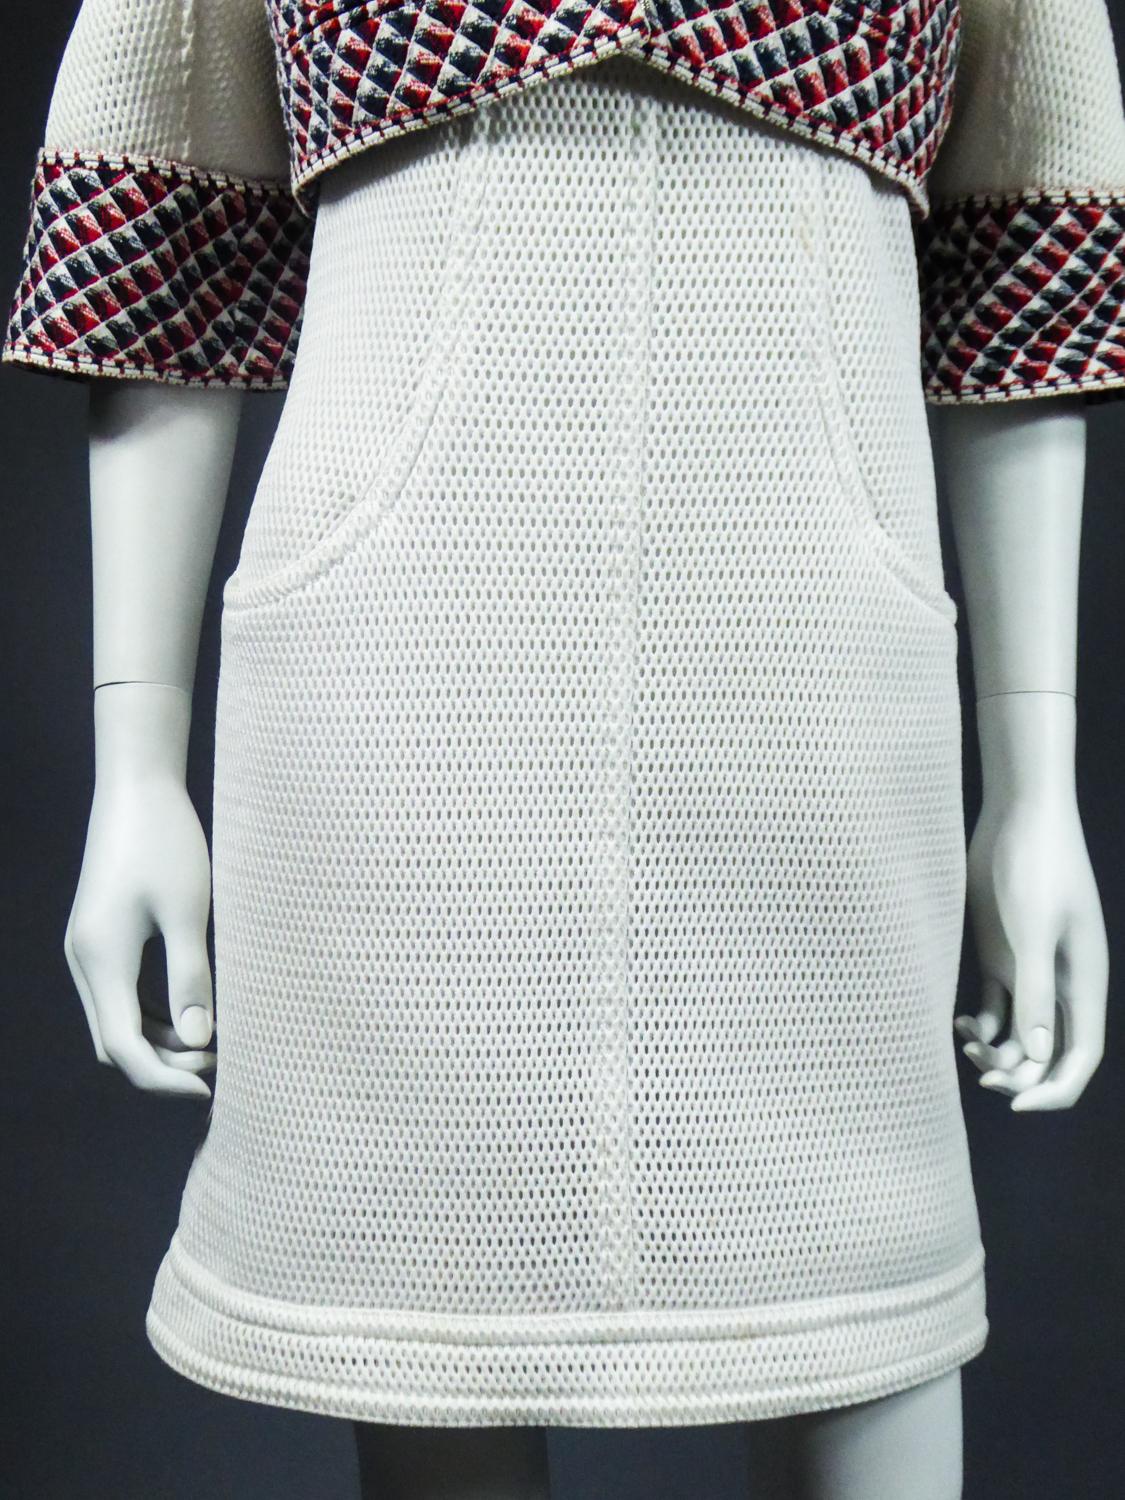 Chanel Dress and Bolero - Karl Lagerfeld Spring Summer 2013 Collection For Sale 1